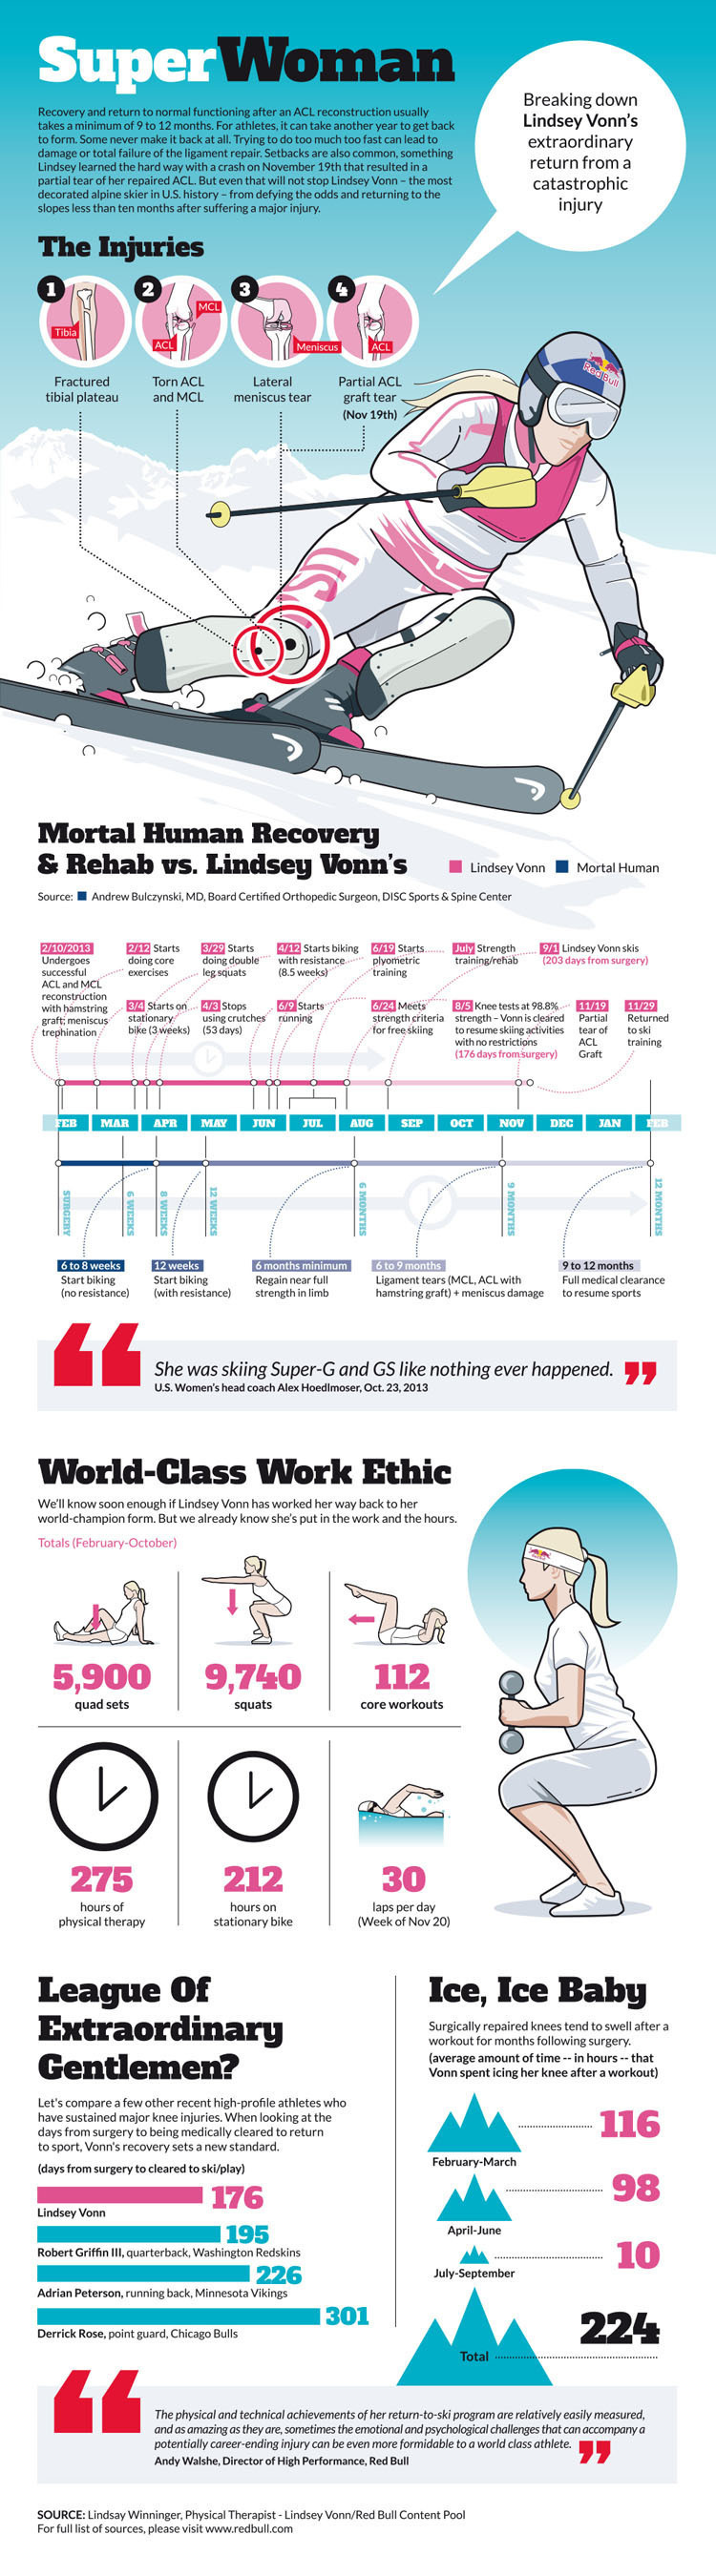 This weekend we saw the return of Lindsey Vonn to World Cup competition, just 10 months after she sustained a potentially catastrophic knee injury. Her comeback has been characteristic of all things Lindsey does - remarkably fast. This infographic highlights the details behind the effort she has put in and just how her comeback stacks up against other well known athletes. (PRNewsFoto/Red Bull Content Pool) (PRNewsFoto/RED BULL CONTENT POOL)